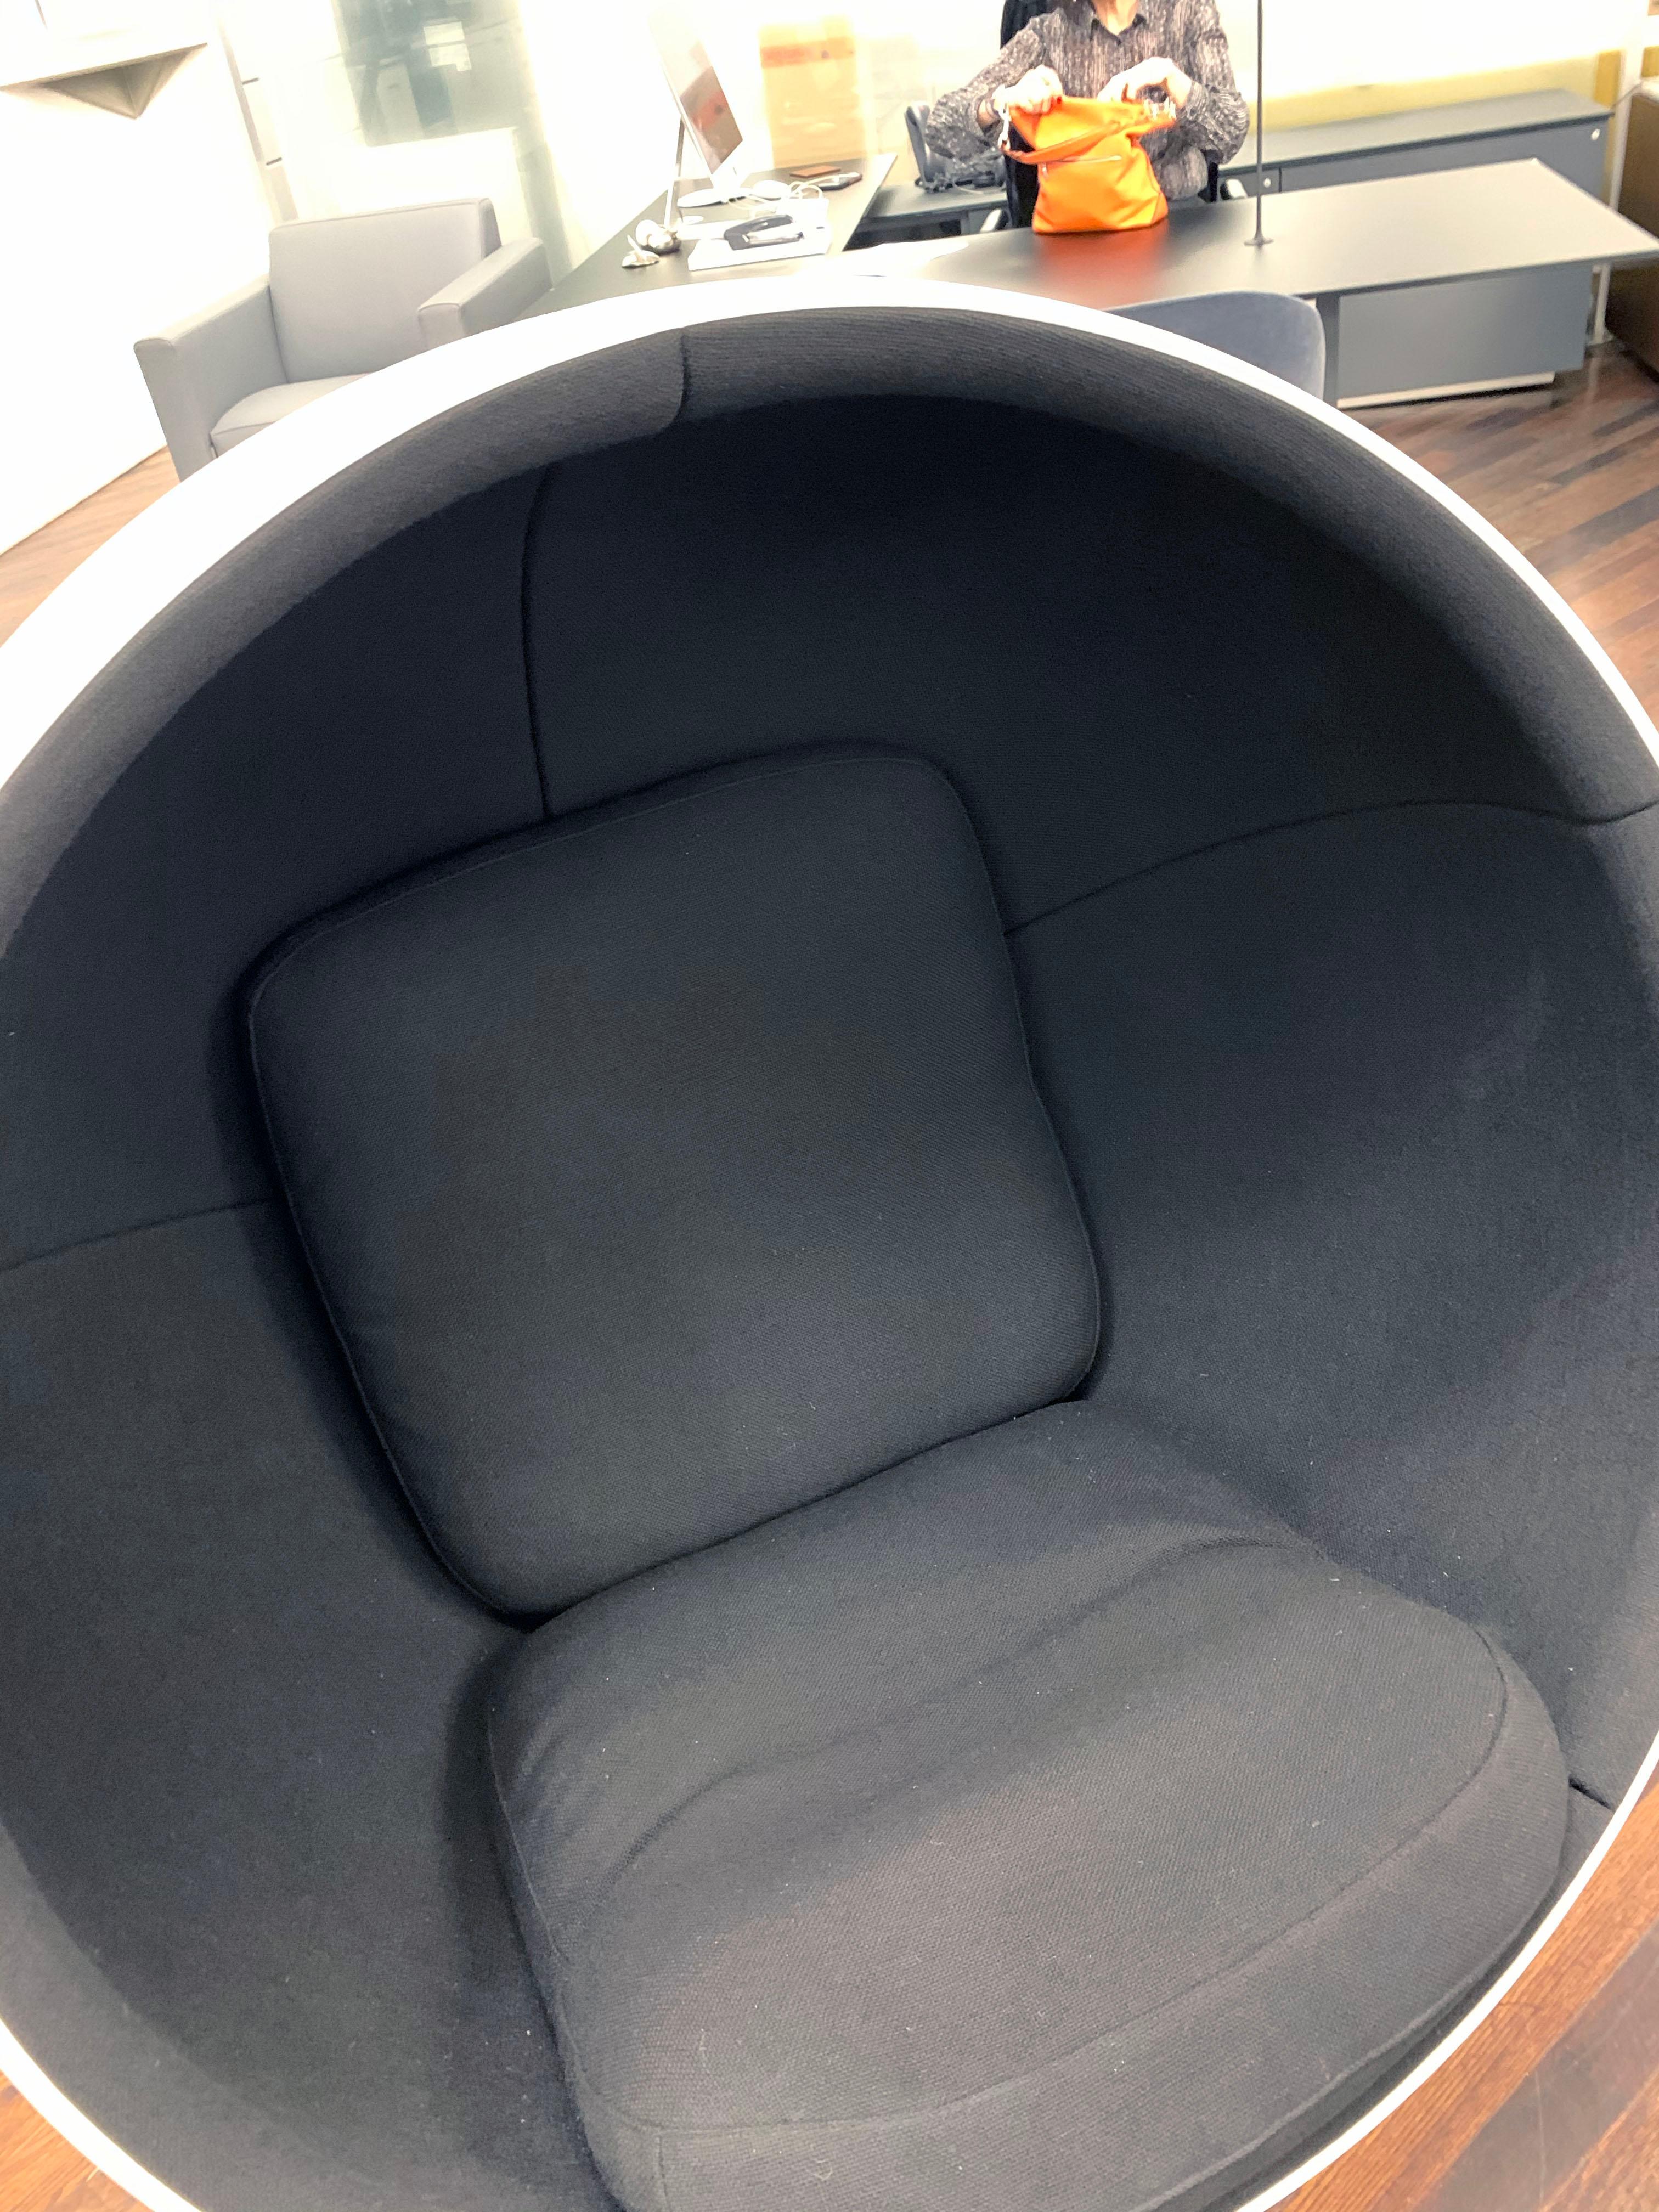 Iconic Eero Aarnio Black and White Swivel Ball Lounge Chair - In Stock 1